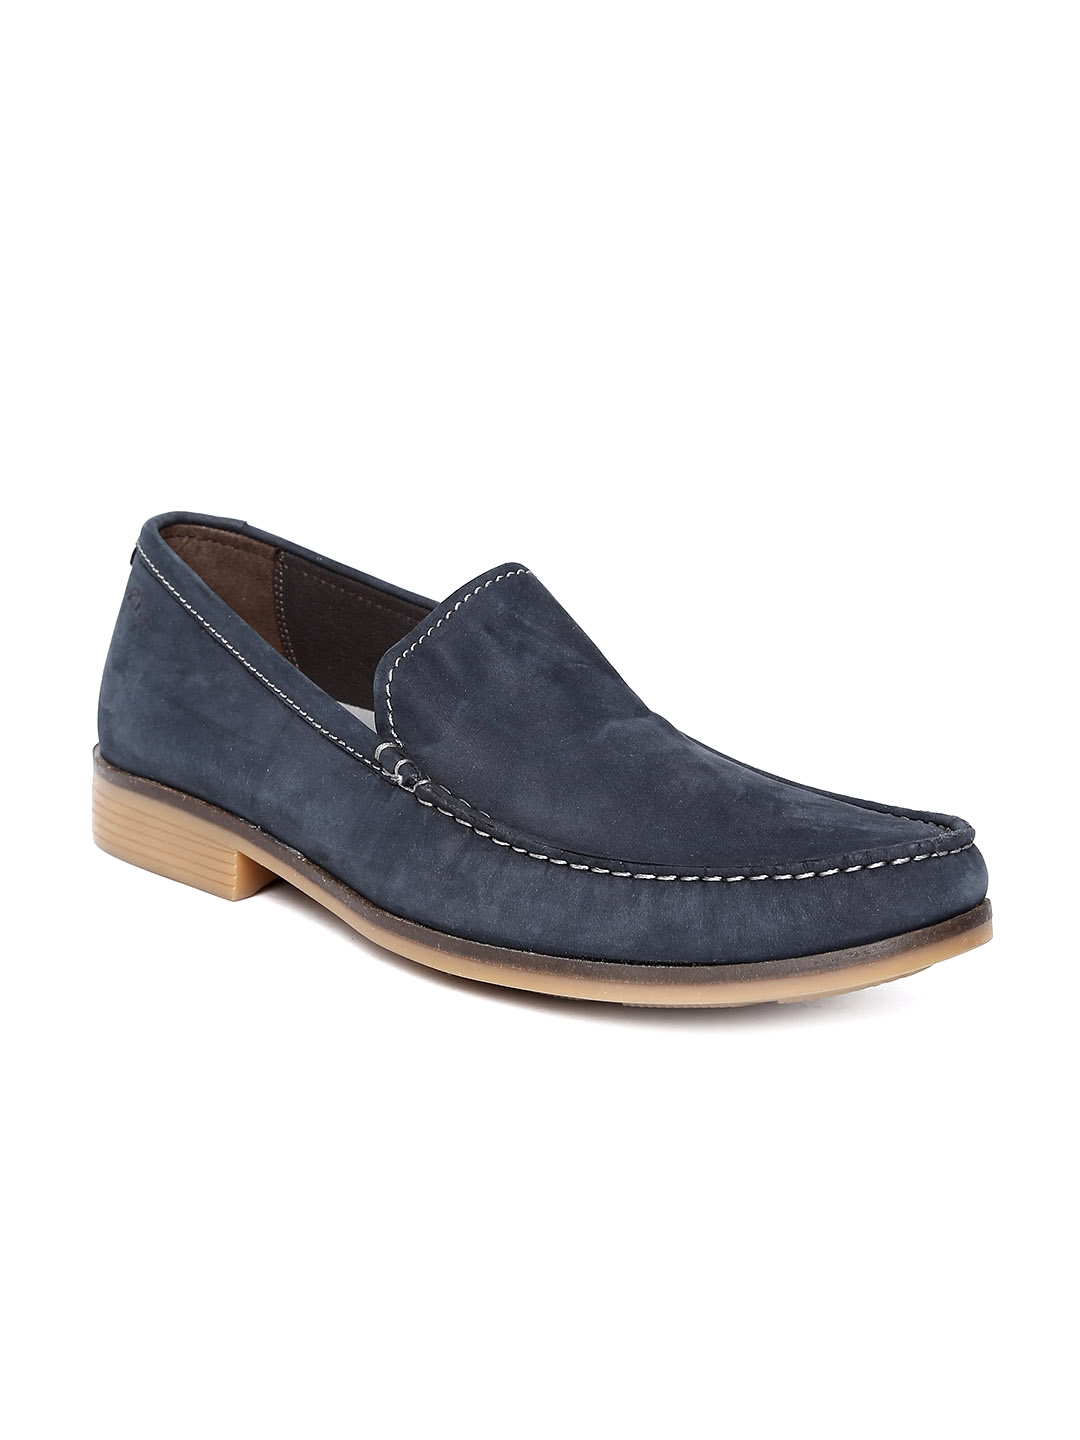 Buy Clarks Men Navy Suede Loafers - Casual Shoes for Men 624067 | Myntra